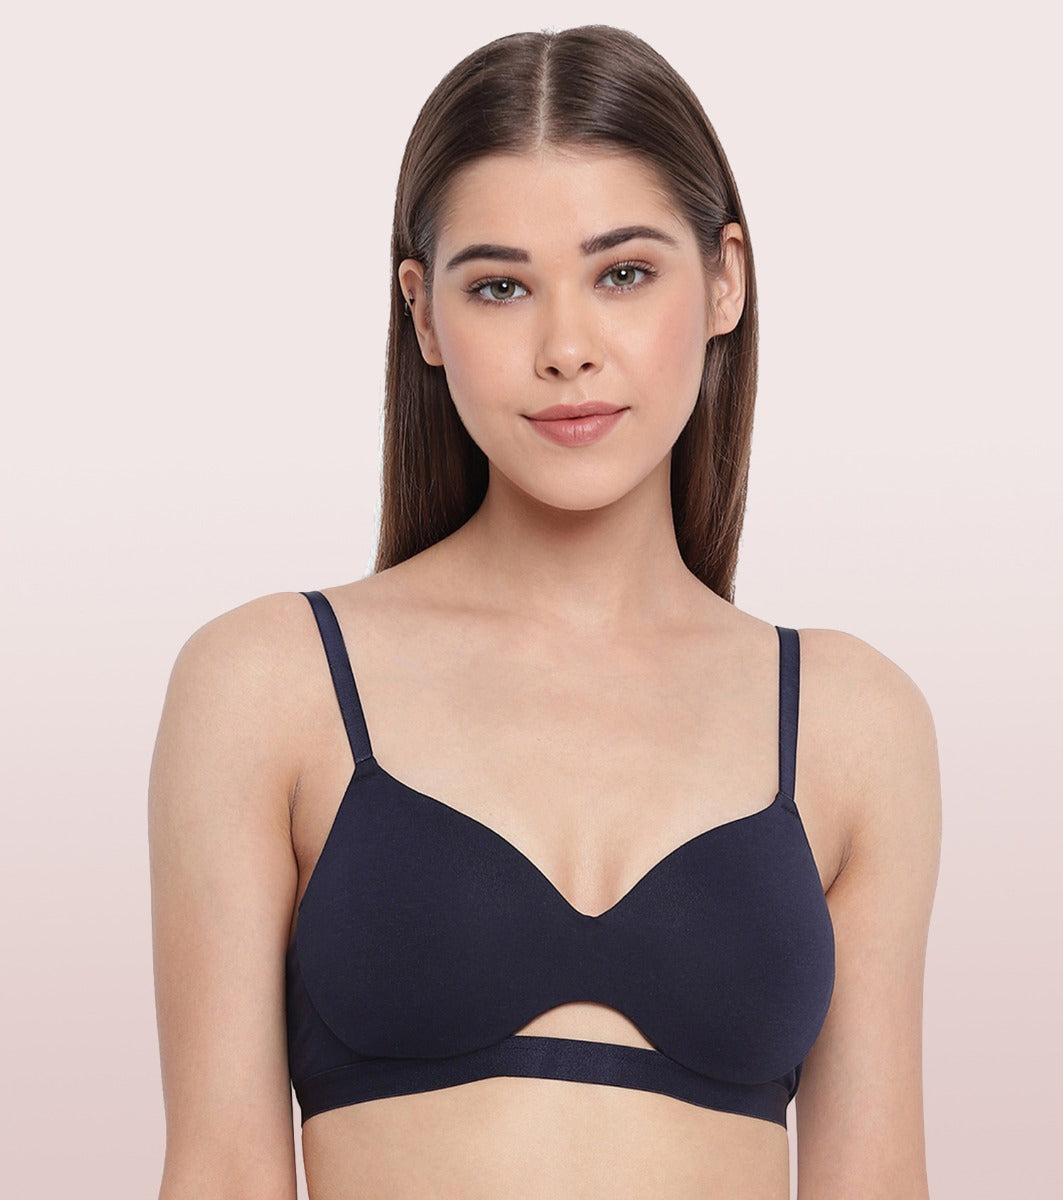 Enamor CloudSoft A032 Invisible Neckline Cotton T-shirt Bra for Women- Medium Coverage, Padded and Wirefree - Eclipse